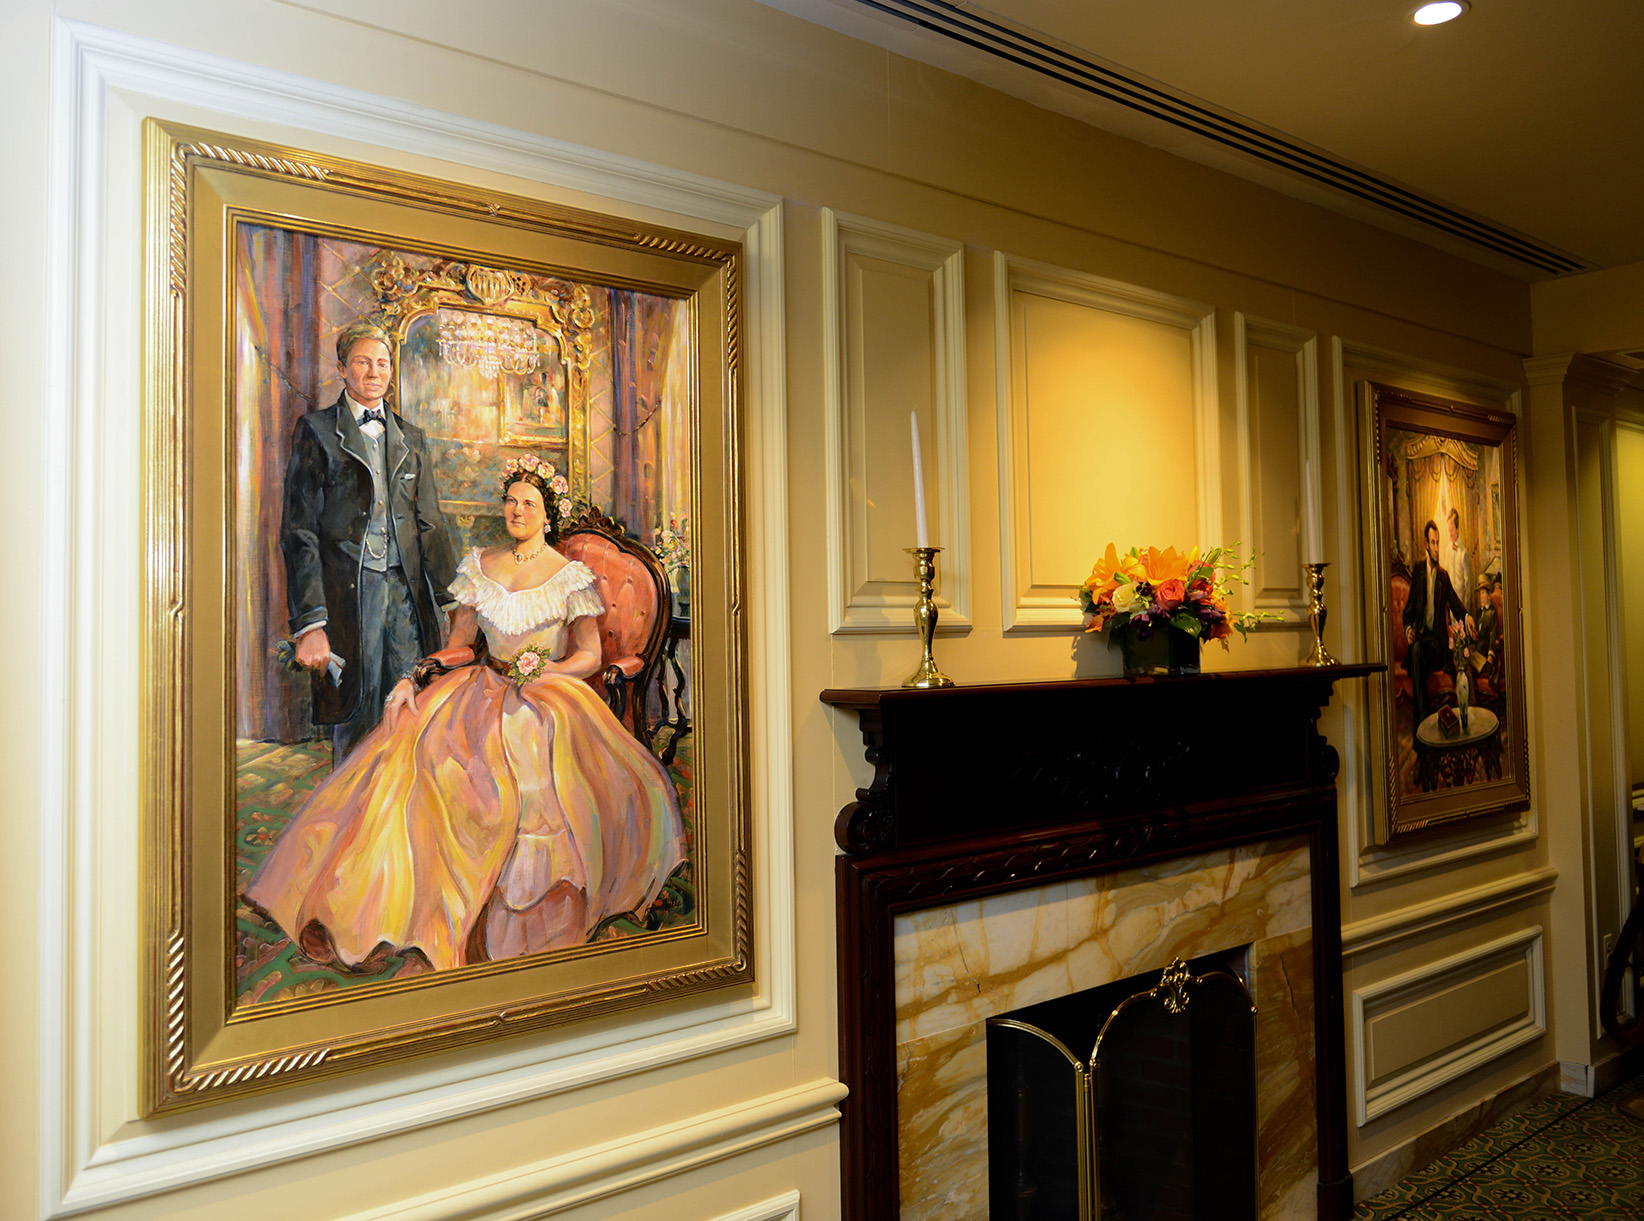 A painting of Abraham and Mary Lincoln hangs near a fireplace in the lobby of the Willard Hotel in Washington, D.C.